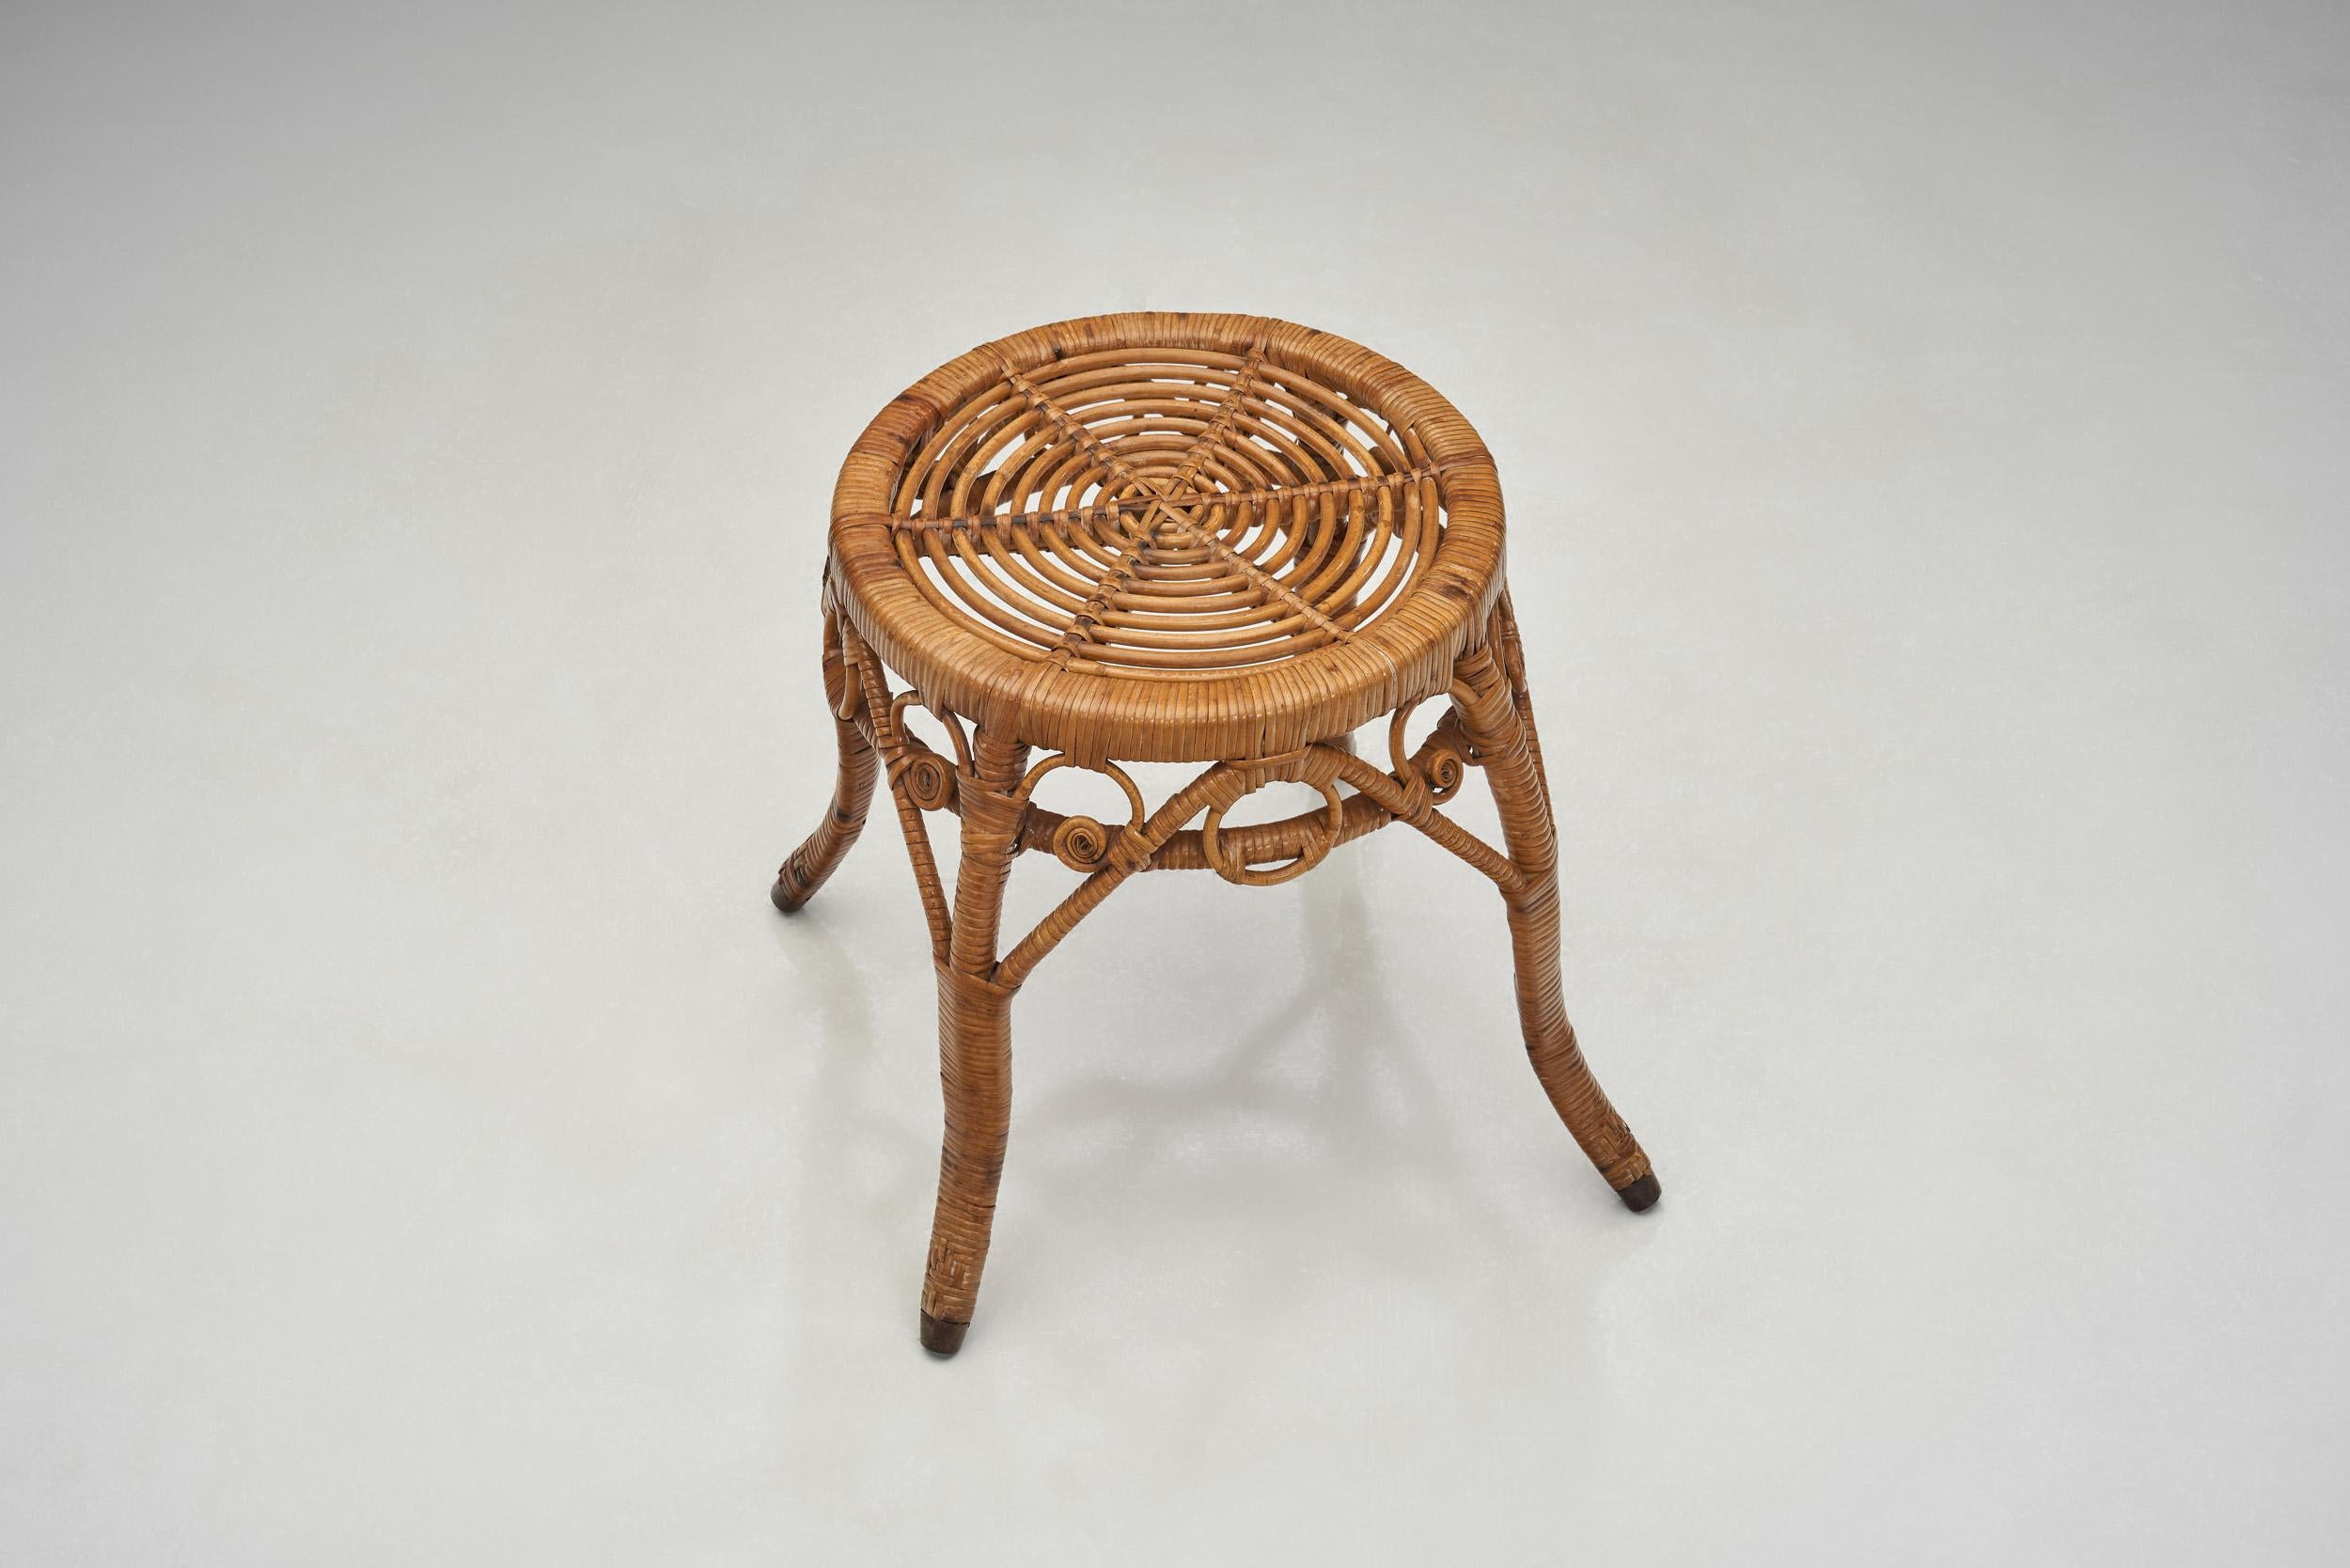 Woven Rattan Stool, Europe Early 20th Century For Sale 1